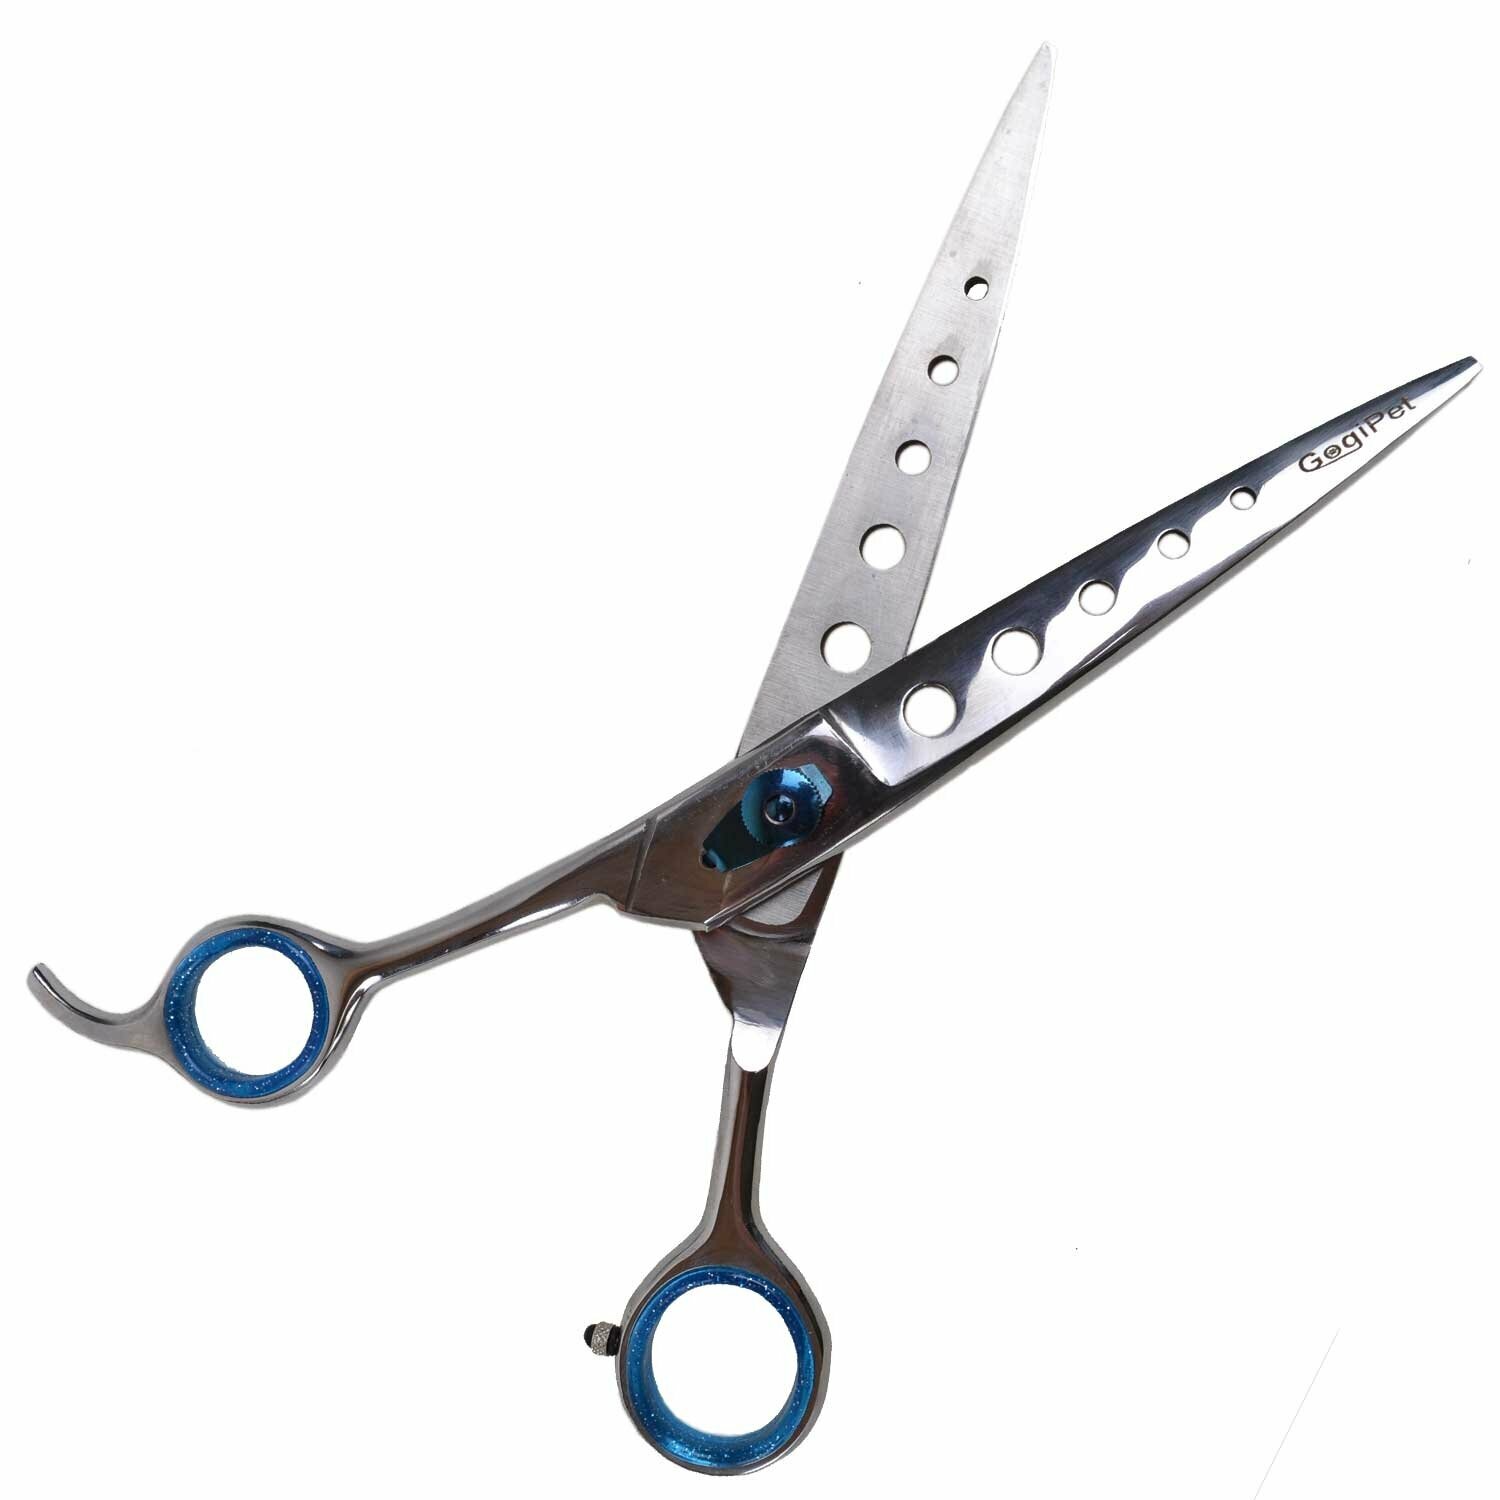 Good dog scissors with 22 cm - GogiPet scissors for a low price